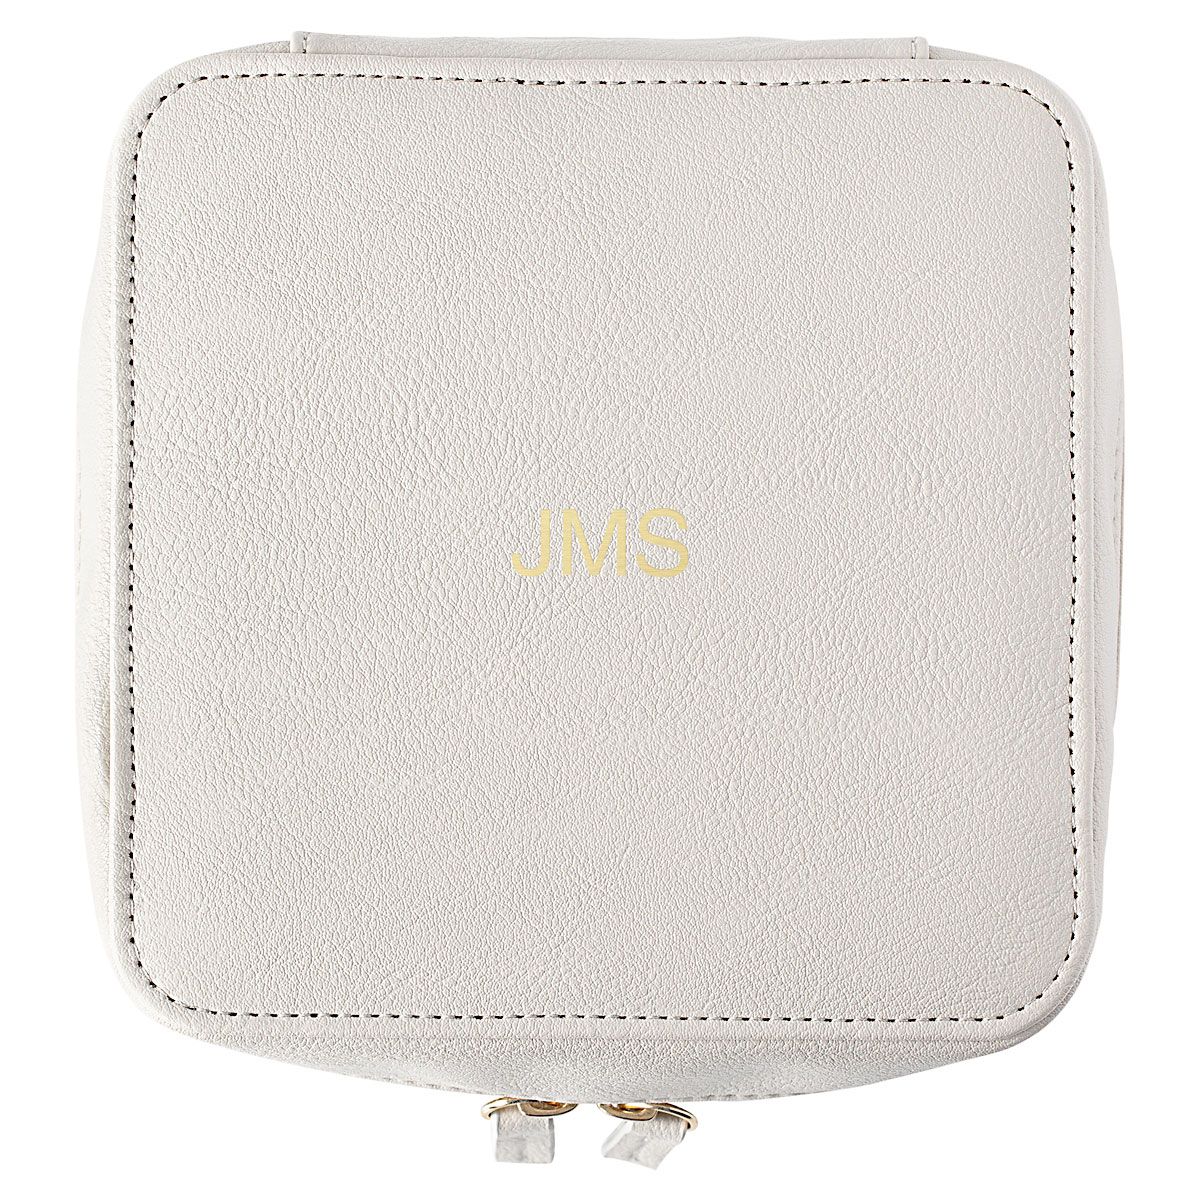 Personalized Faux Leather Tech Travel Case, Oyster Grey - Monogram